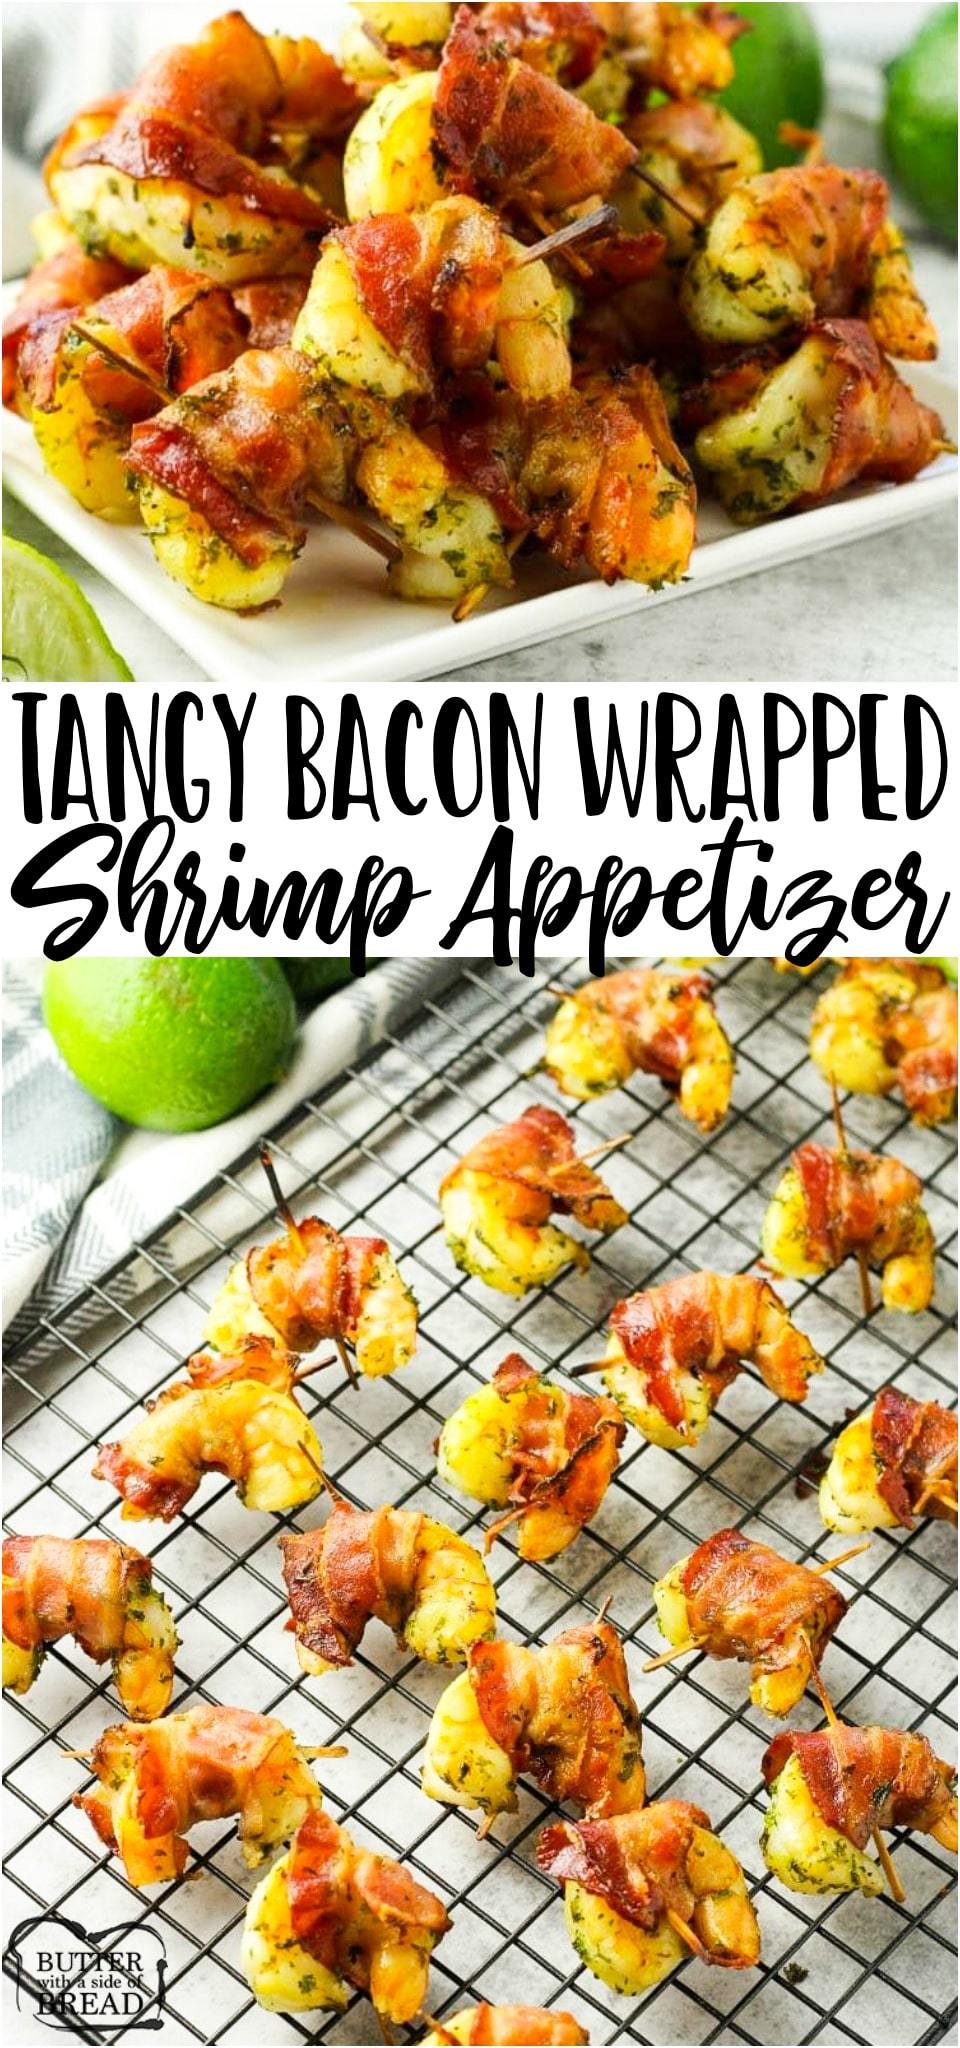 Bacon Wrapped Shrimp is a simple appetizer that only takes 6 ingredients & minutes to cook. This bacon wrapped shrimp recipe is a delicious combination of tangy lime & savory shrimp and bacon. #shrimp #bacon #appetizer #easyrecipe from BUTTER WITH A SIDE OF BREAD